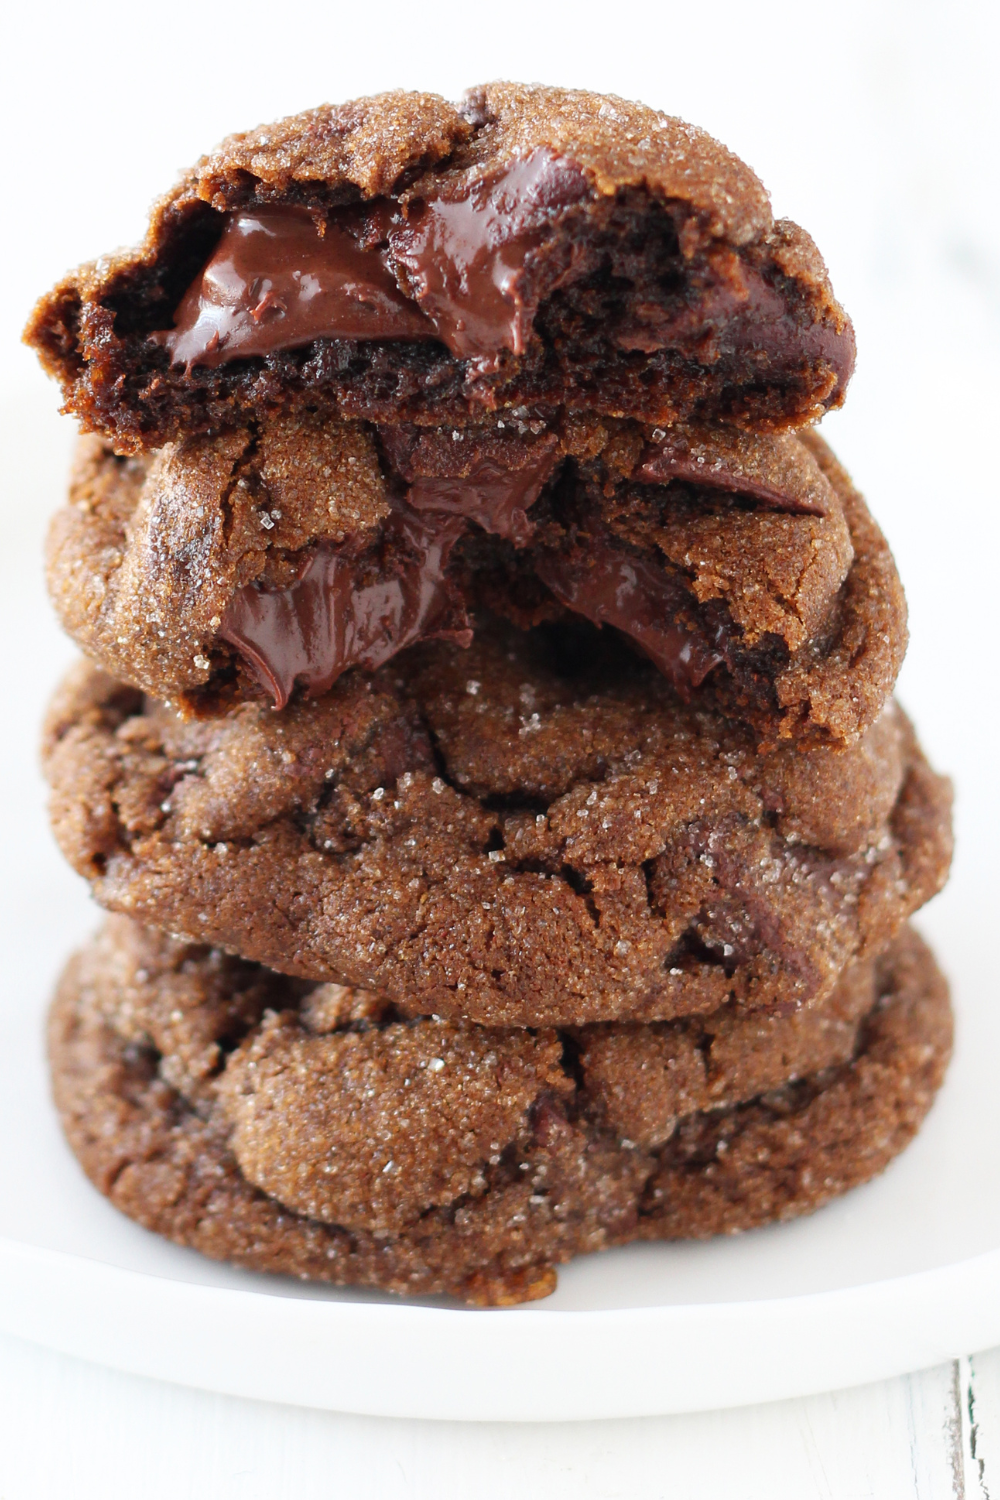 a stack of Chewy Chocolate Gingerbread Cookies with the top cookie broken in half to show the gooey interior.